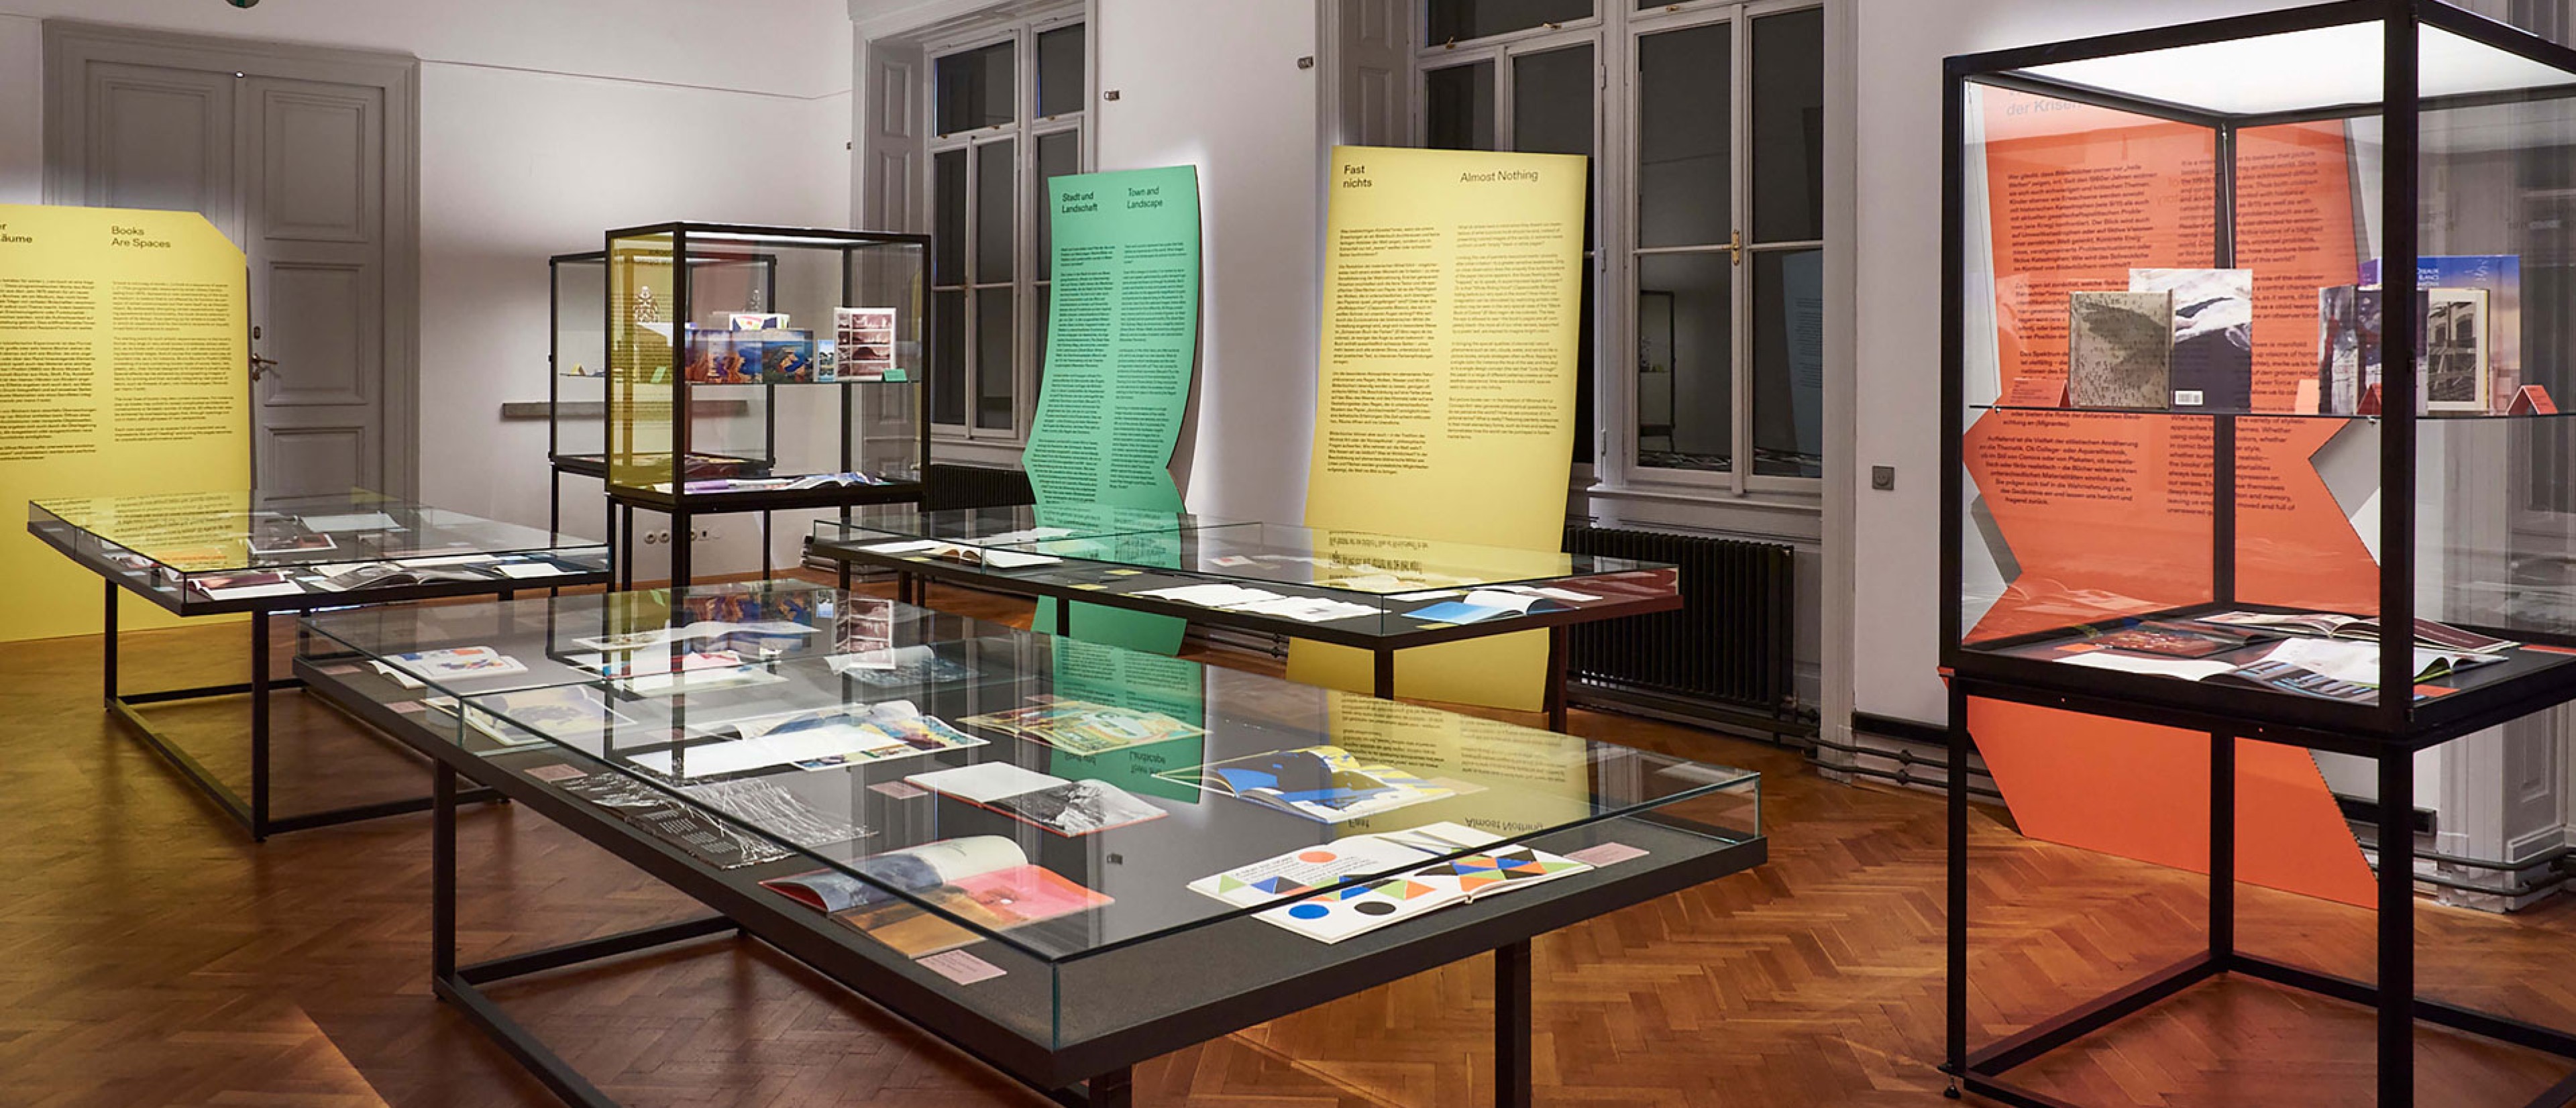 Exhibition room with books in a showcase